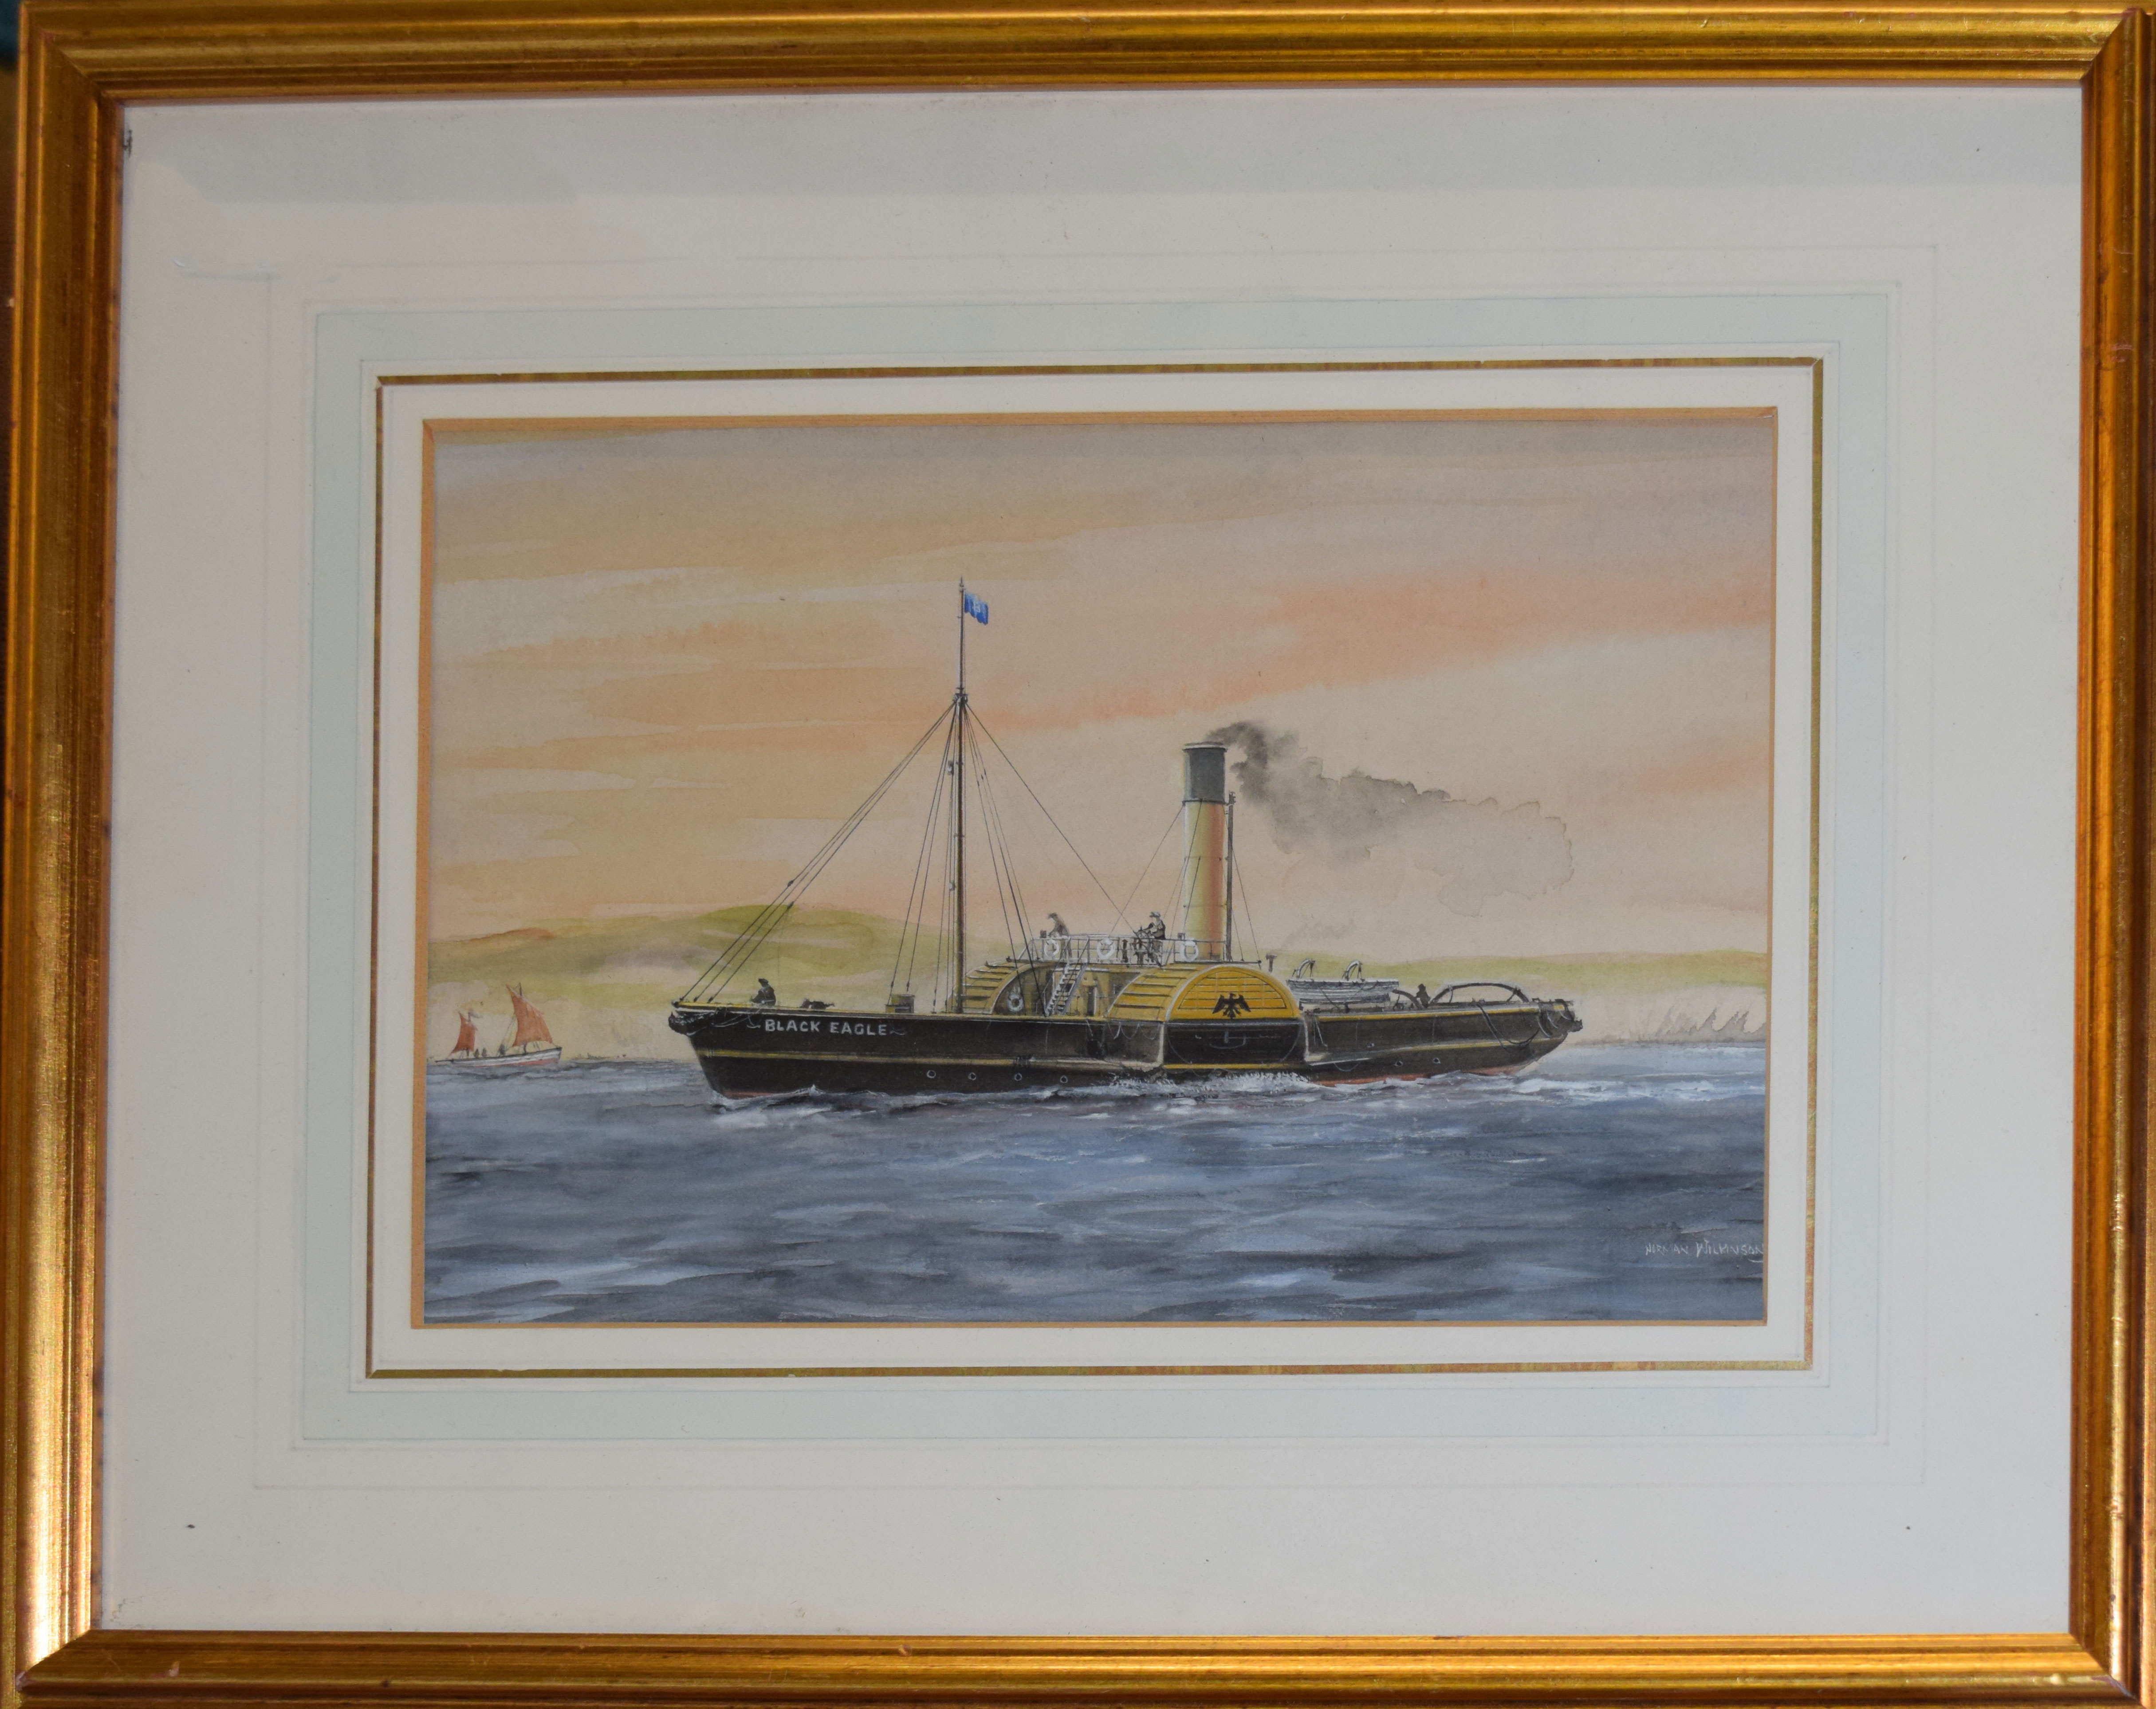 Norman Wilkinson, Paddle Steamer Black Eagle, watercolour, signed lower right, 20 x 30cm